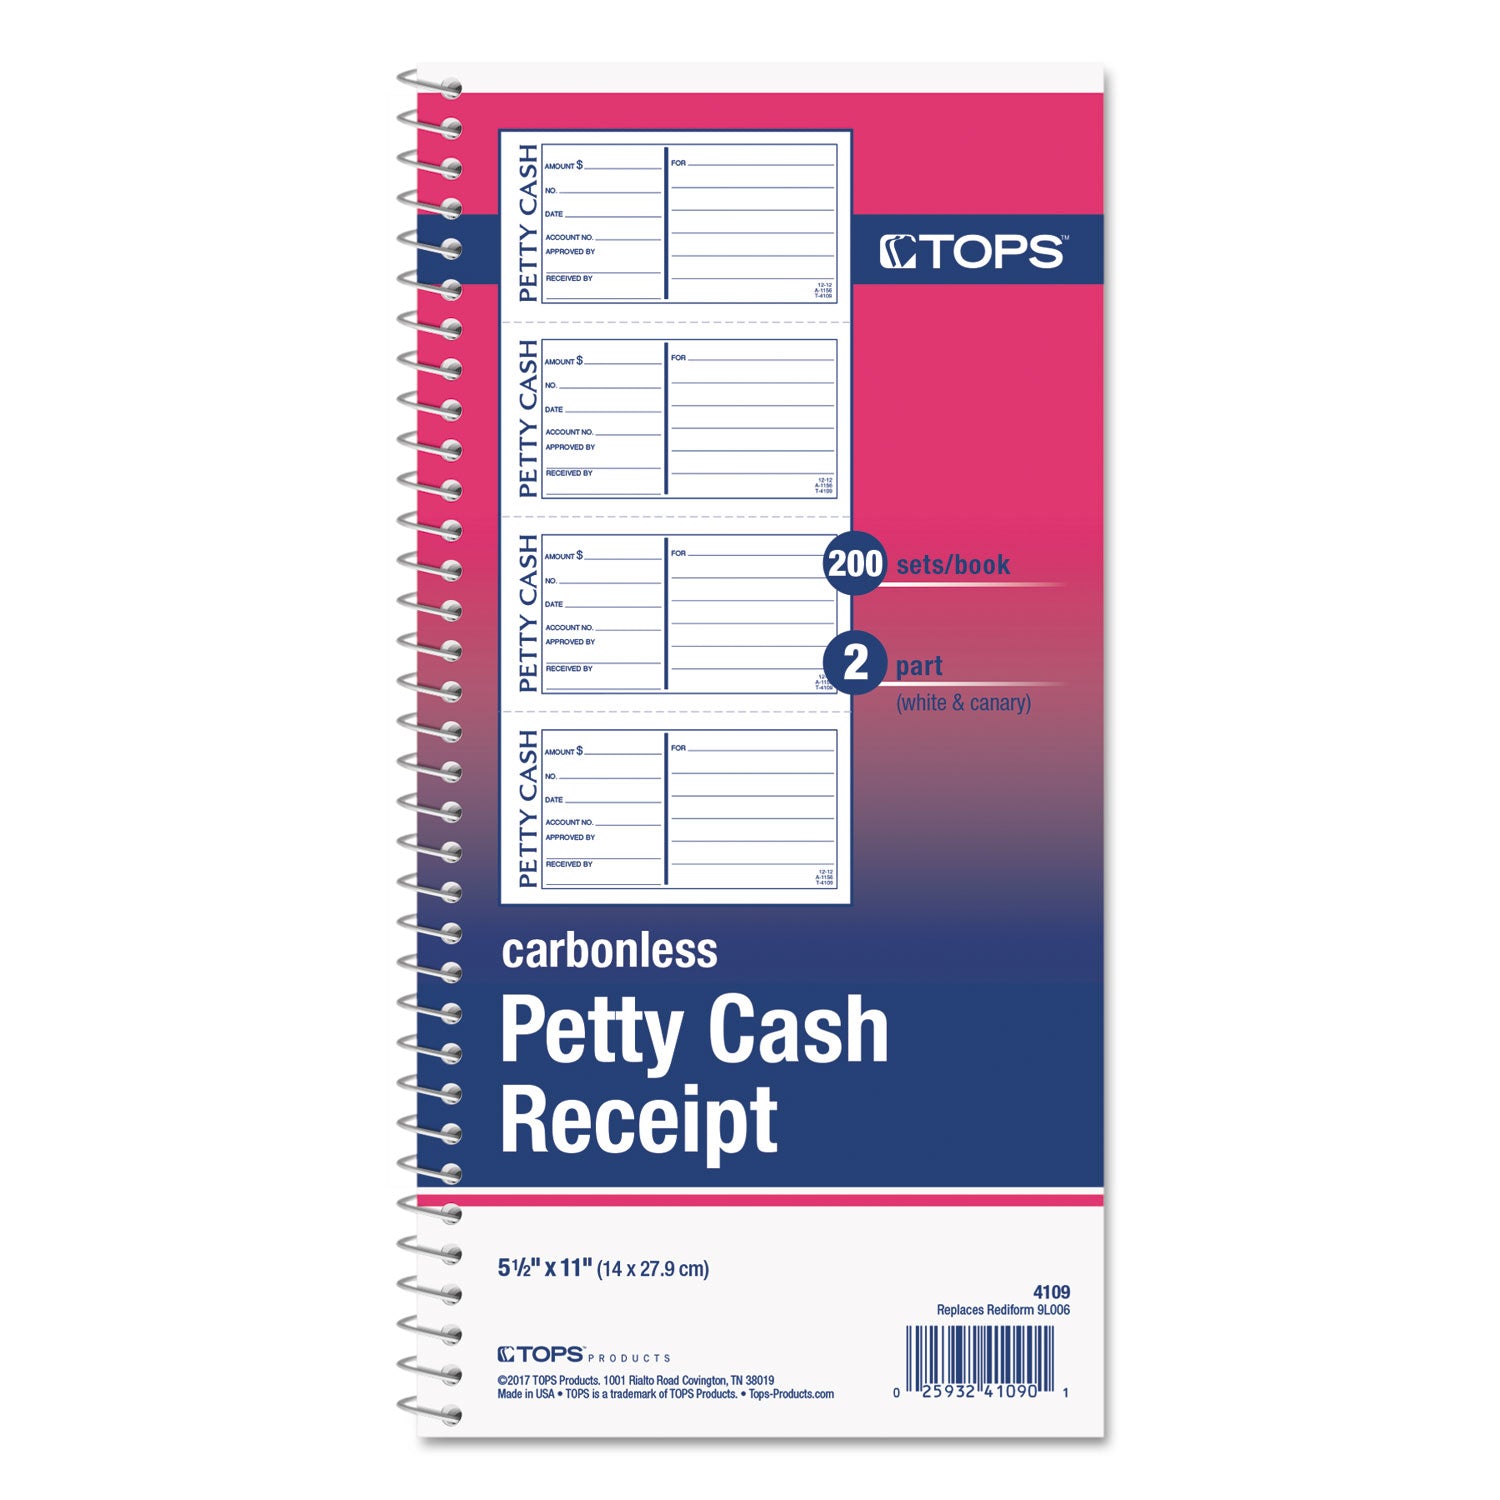 Petty Cash Receipt Book, Two-Part Carbonless, 5 x 2.75, 4 Forms/Sheet, 200 Forms Total - 